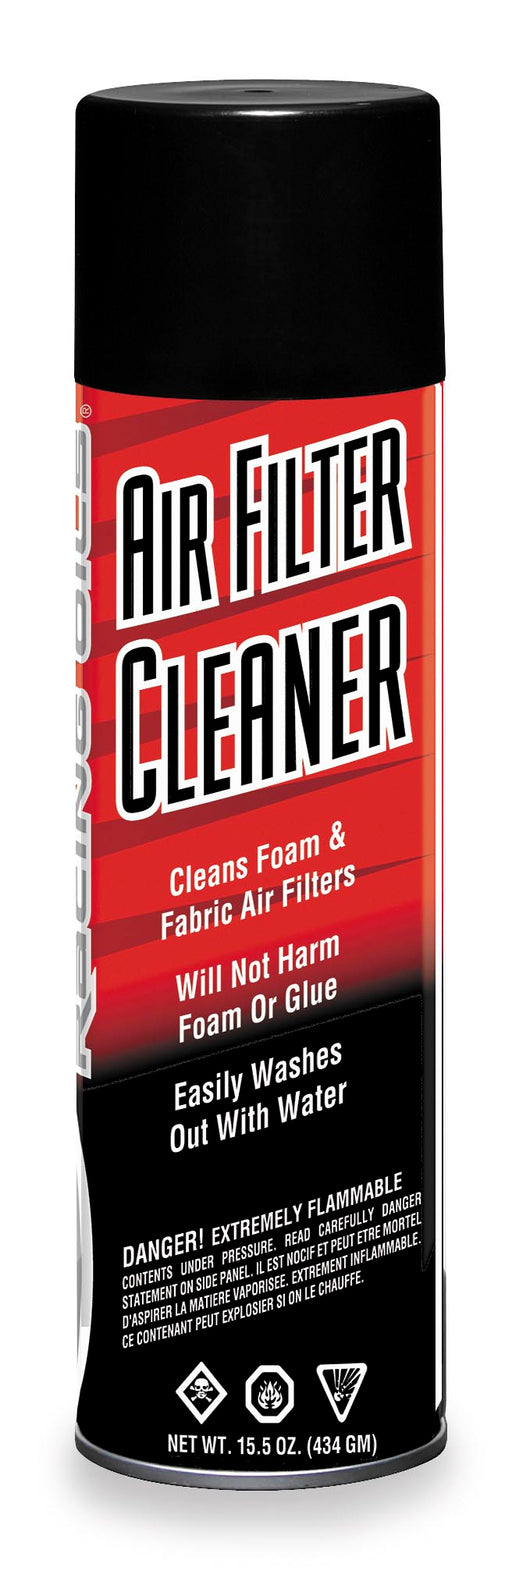 Maxima Foam And Fabric Air Filter Cleaner